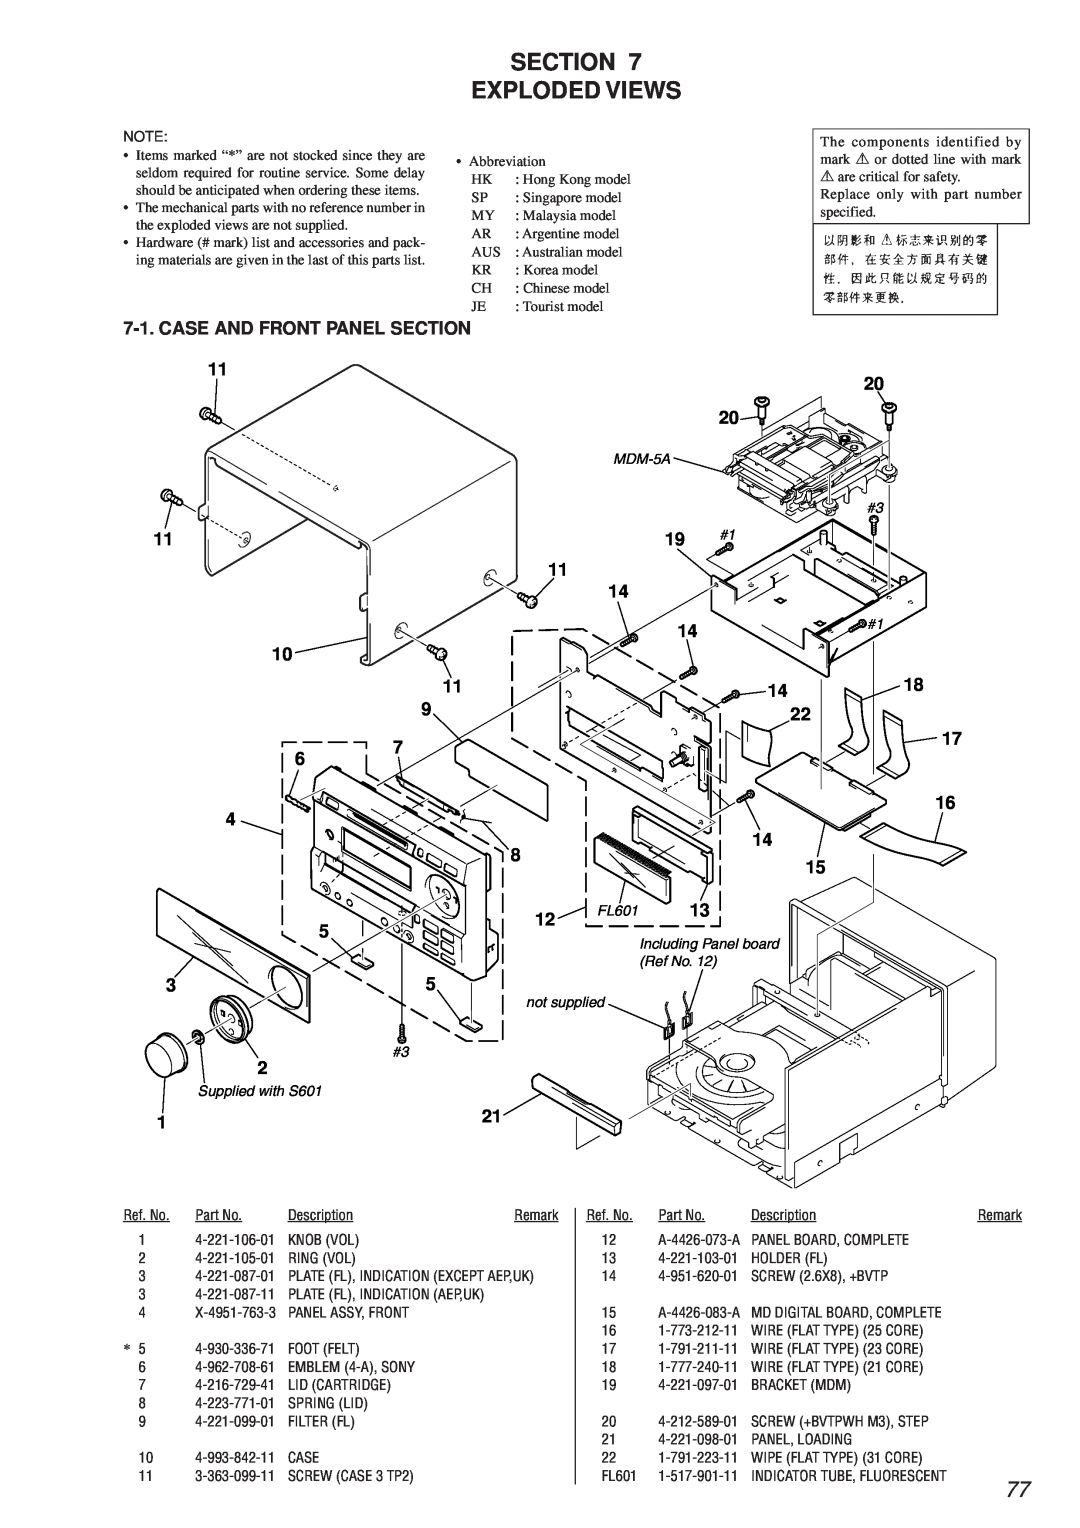 Sony HCD-MD373 service manual Section Exploded Views, CASE AND FRONT PANEL 20, 17 16 